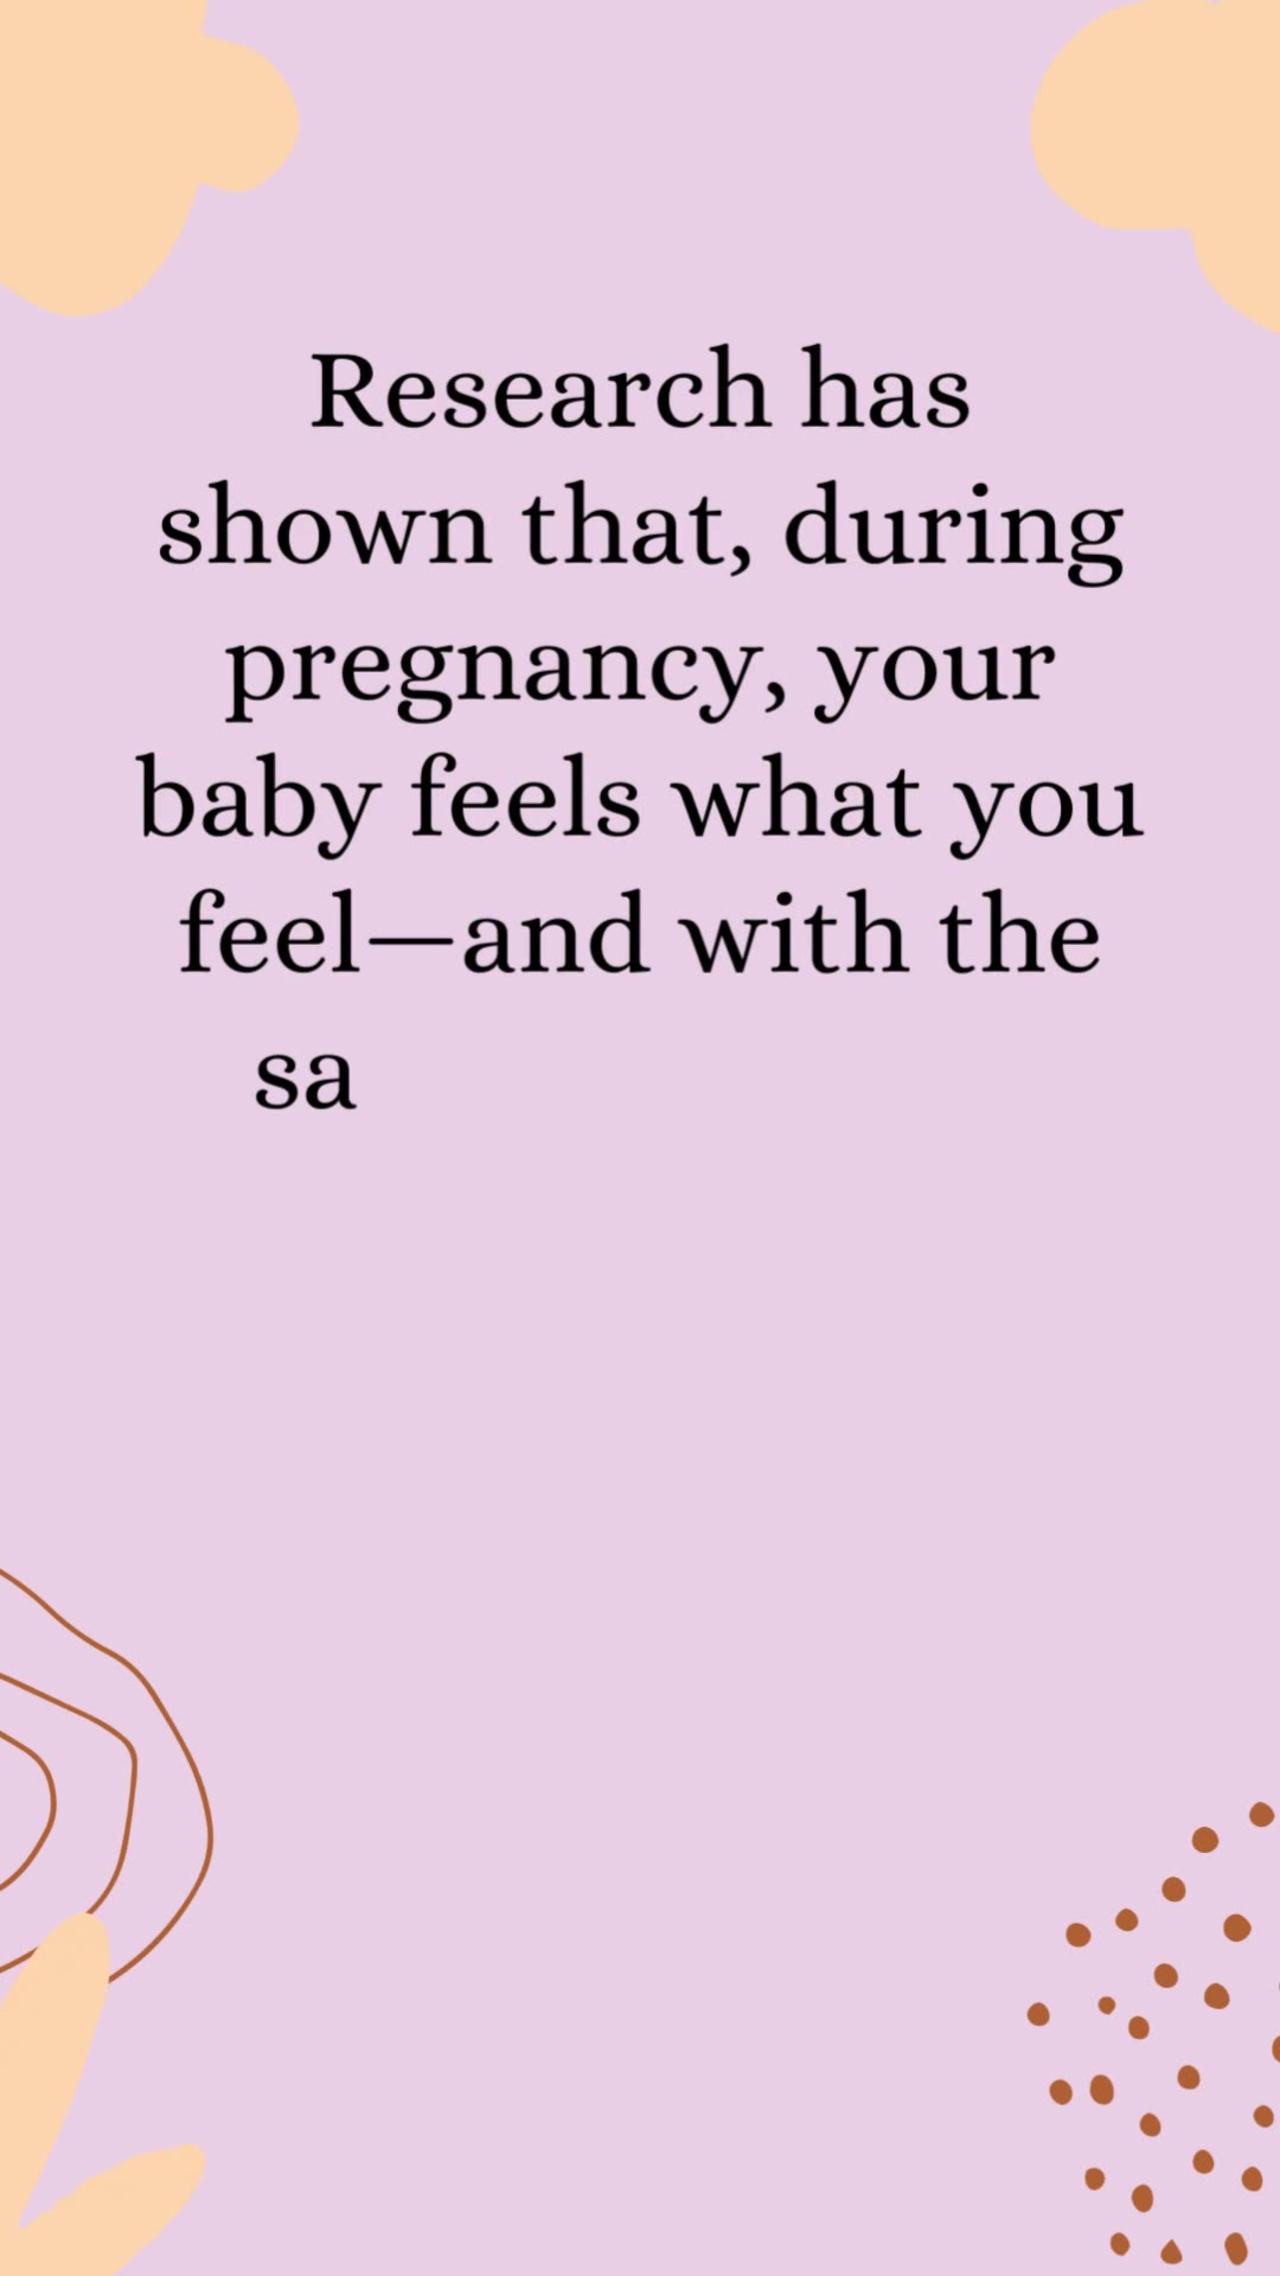 When I Feel Sad While Pregnant, Does My Baby Feel Sad? | Healthyounme | Mother & Baby Care